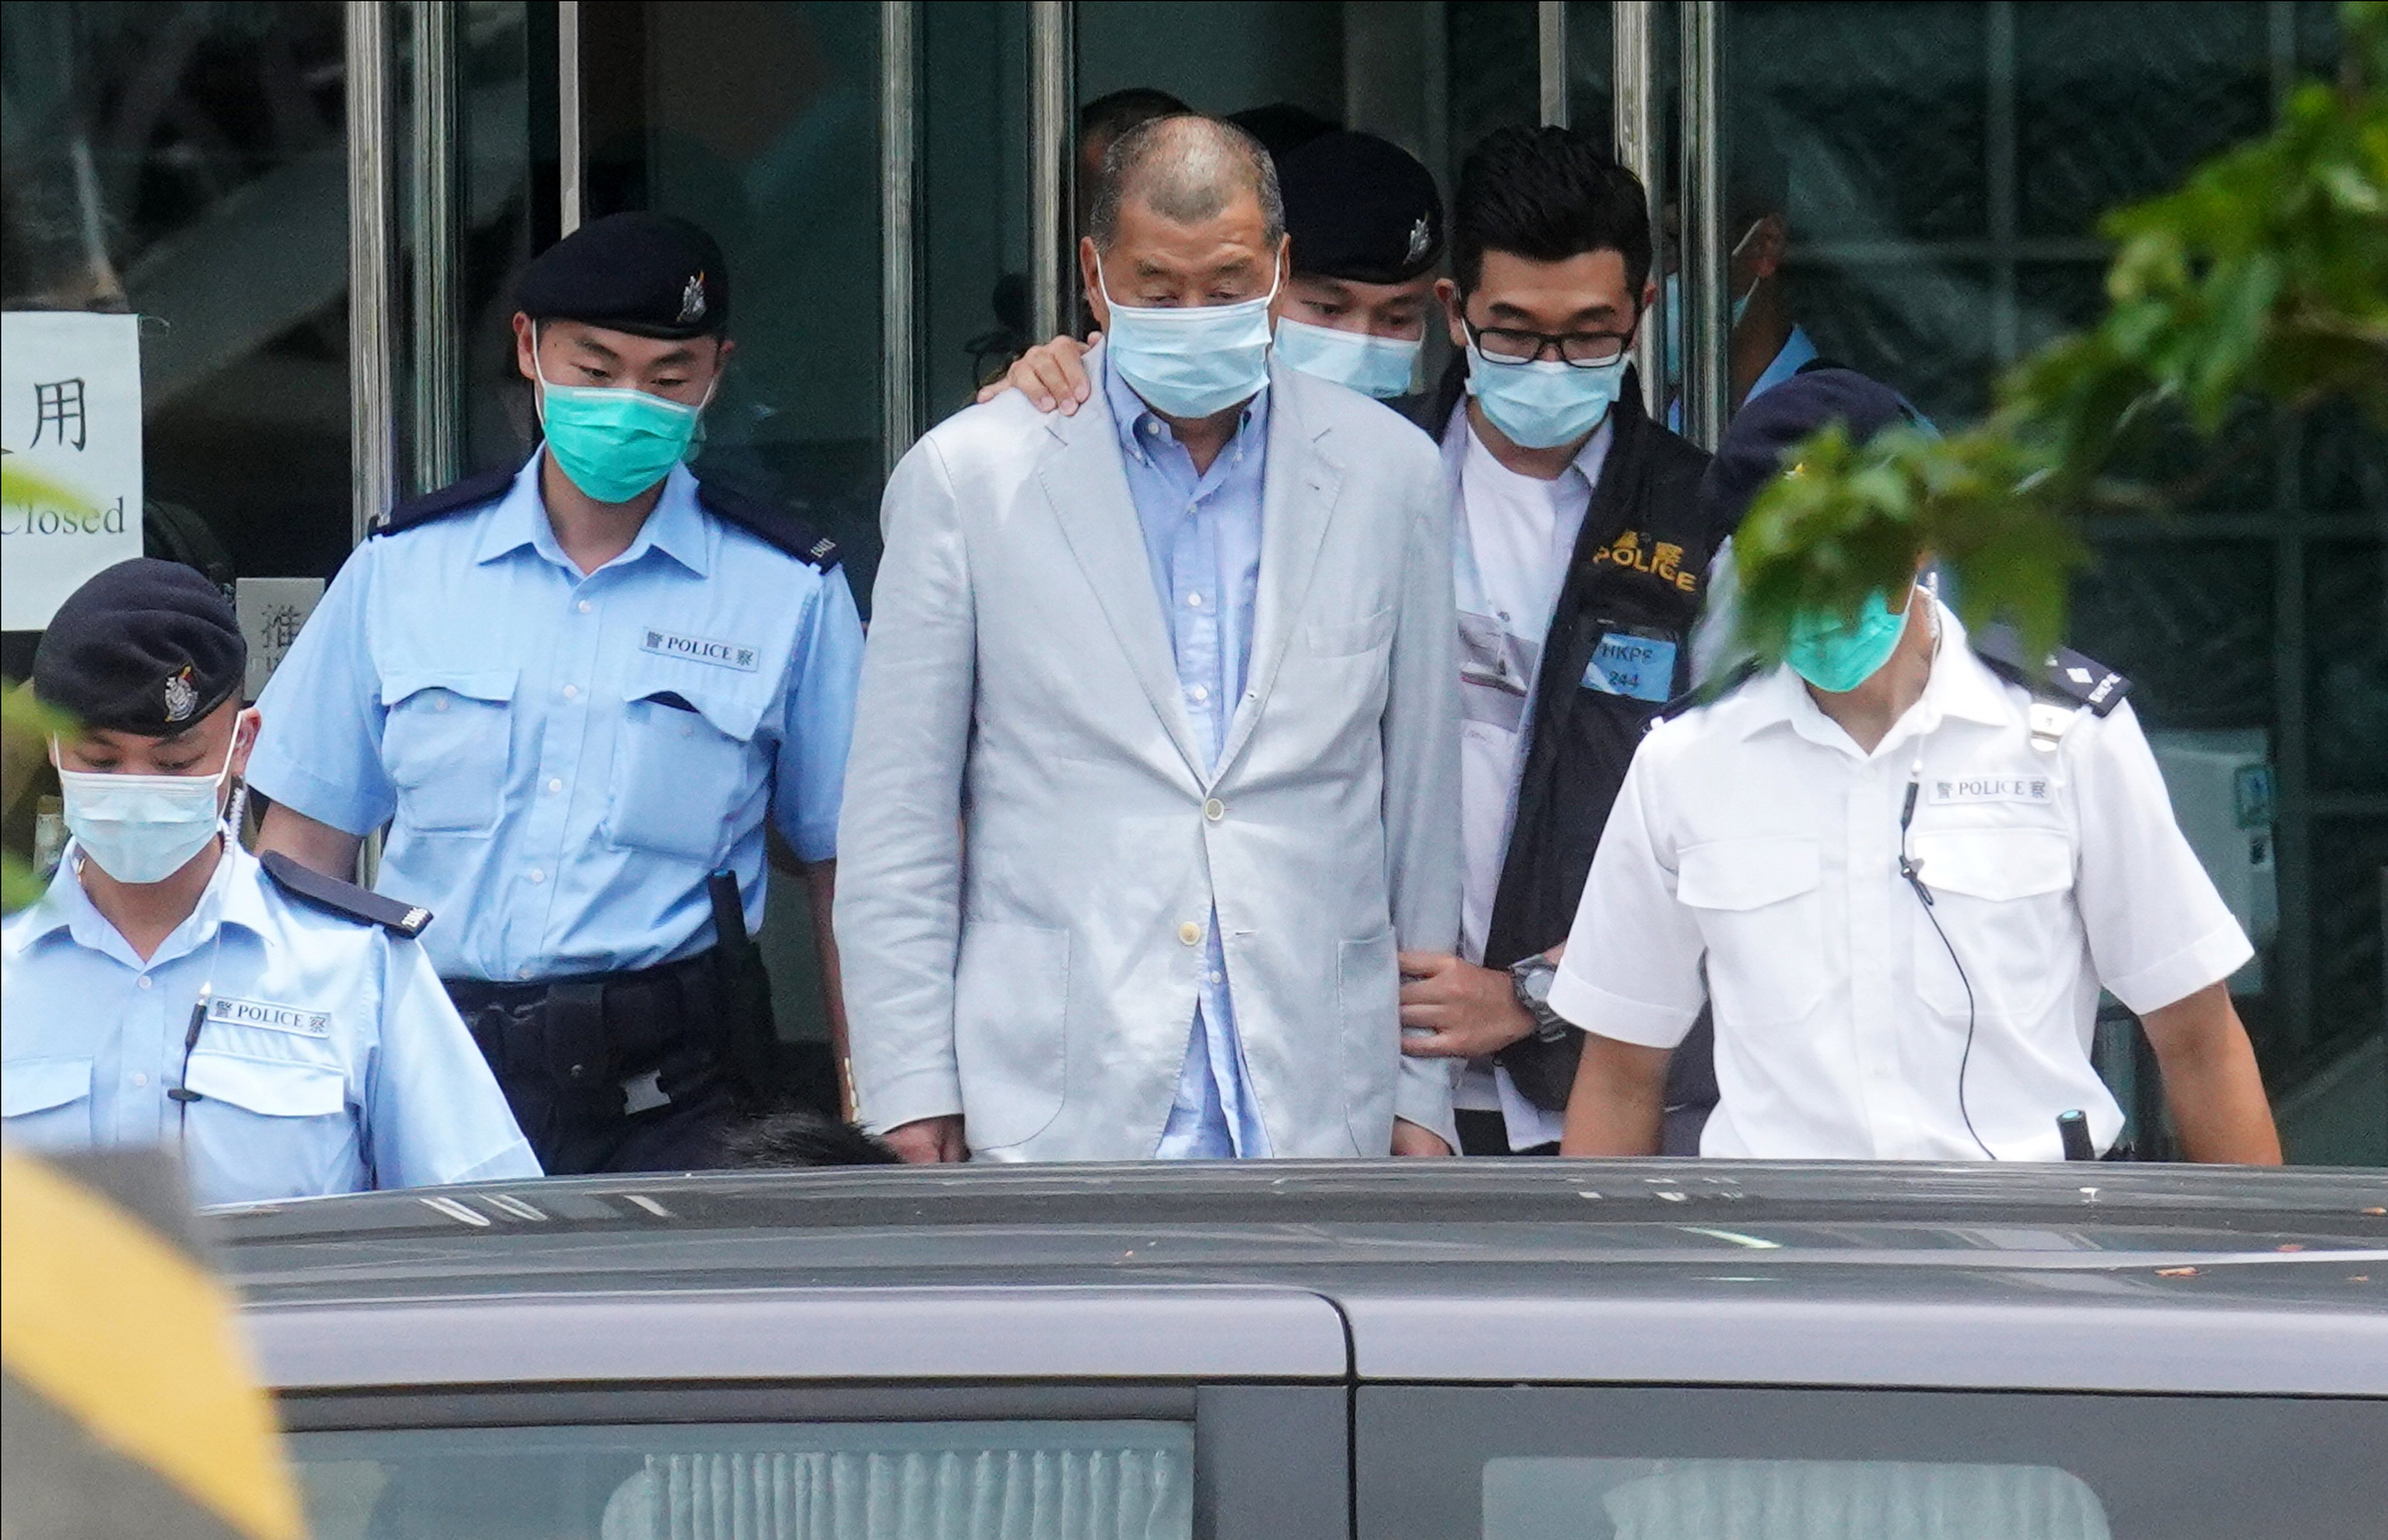 Jimmy Lai is escorted by police after a raid on his Apple Daily headquarters in August 2020. Photo: Winson Wong